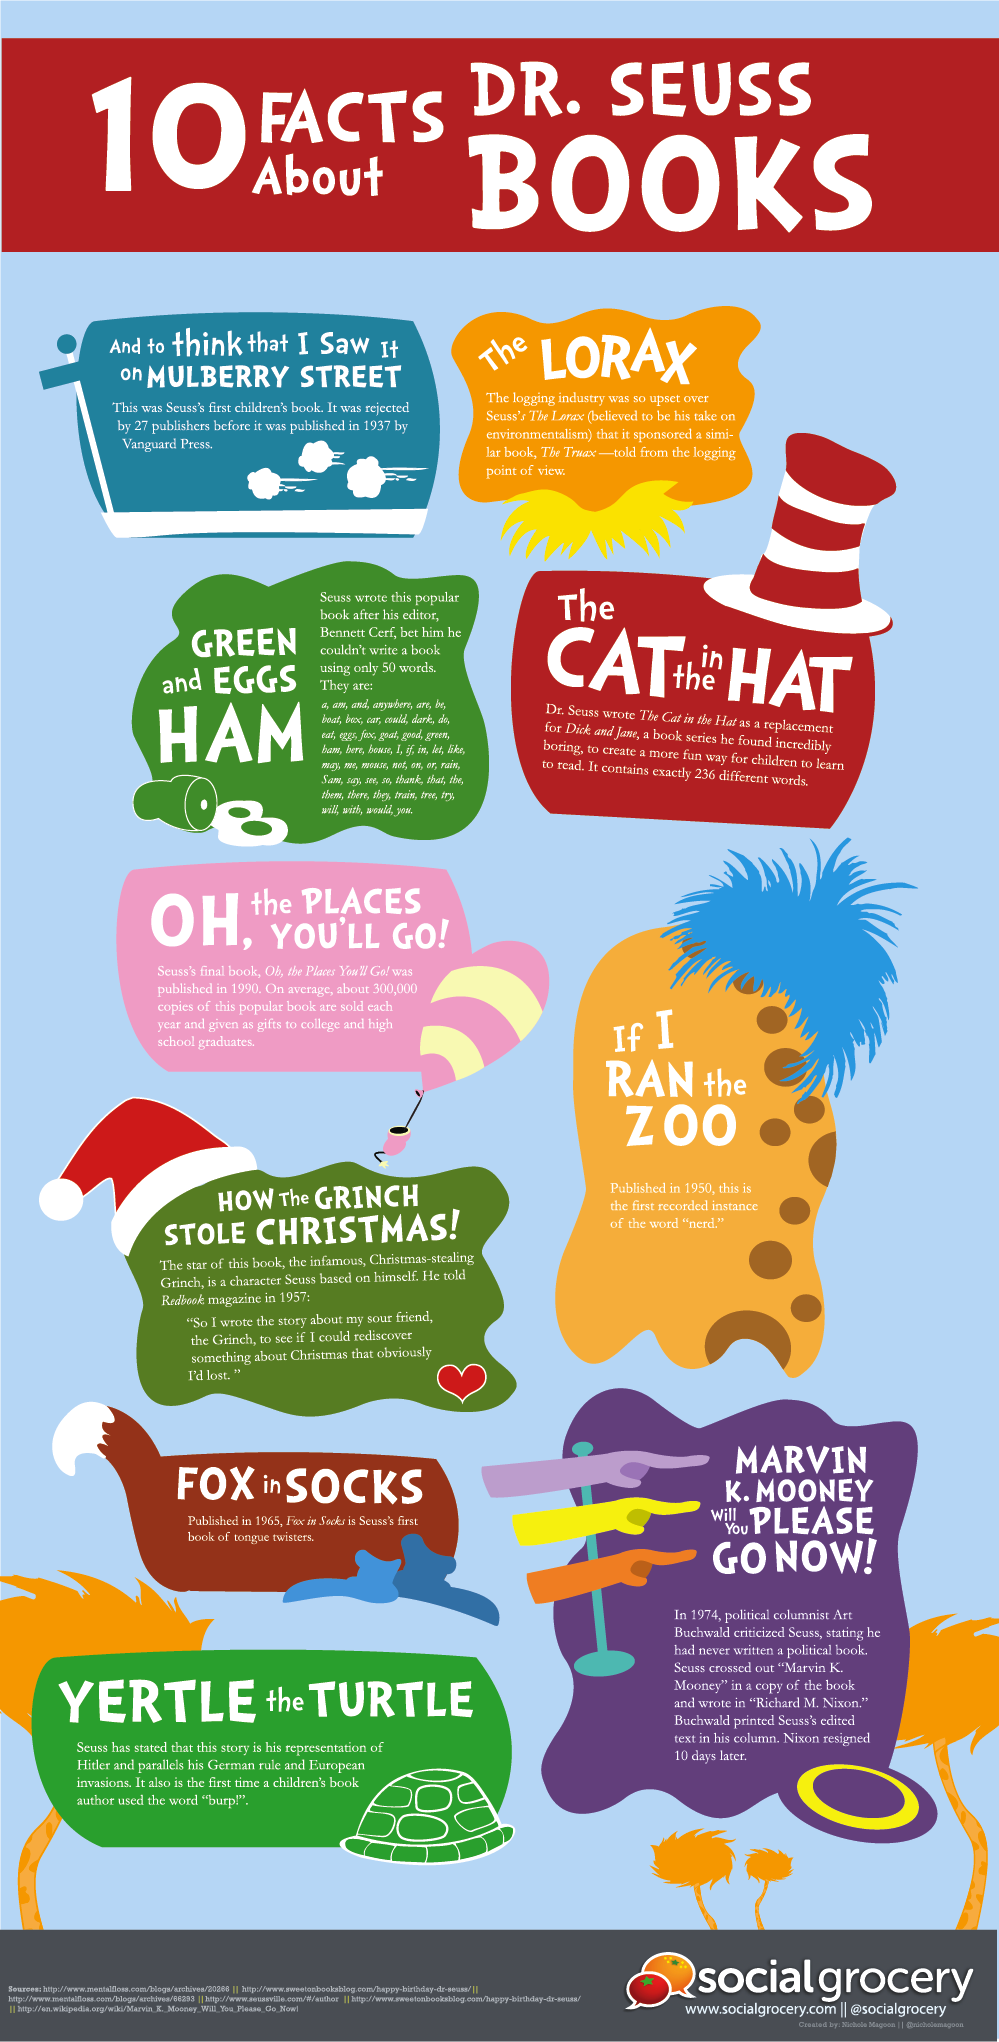 Facts About Dr Seuss Books Visual Ly